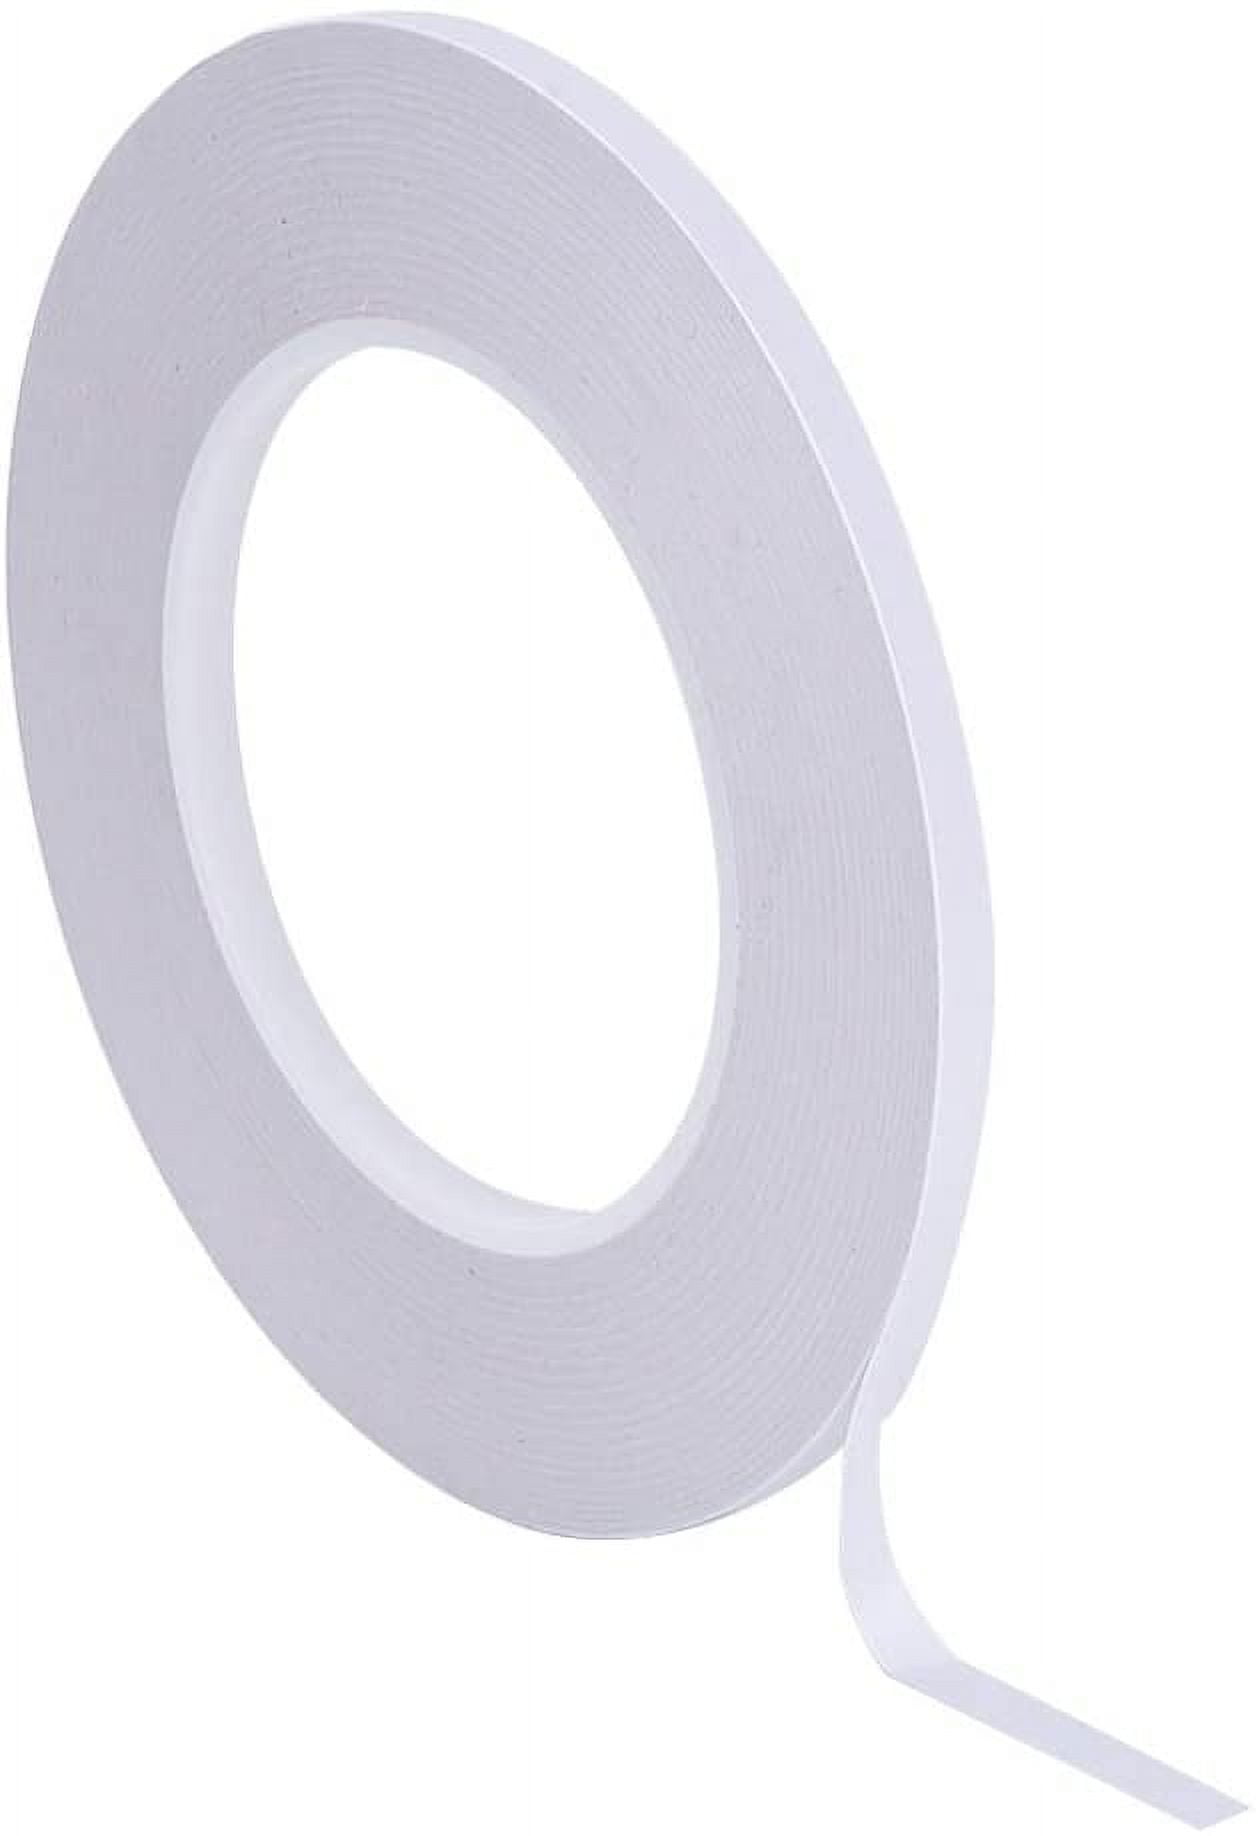 Double Sided Adhesive Tape (43 Yards) for Gifts, Photos, Documents,  Wallpaper, Scrapbooking, Crafts, Ribbon, Cards and Boxes (1/5 Inch)C 